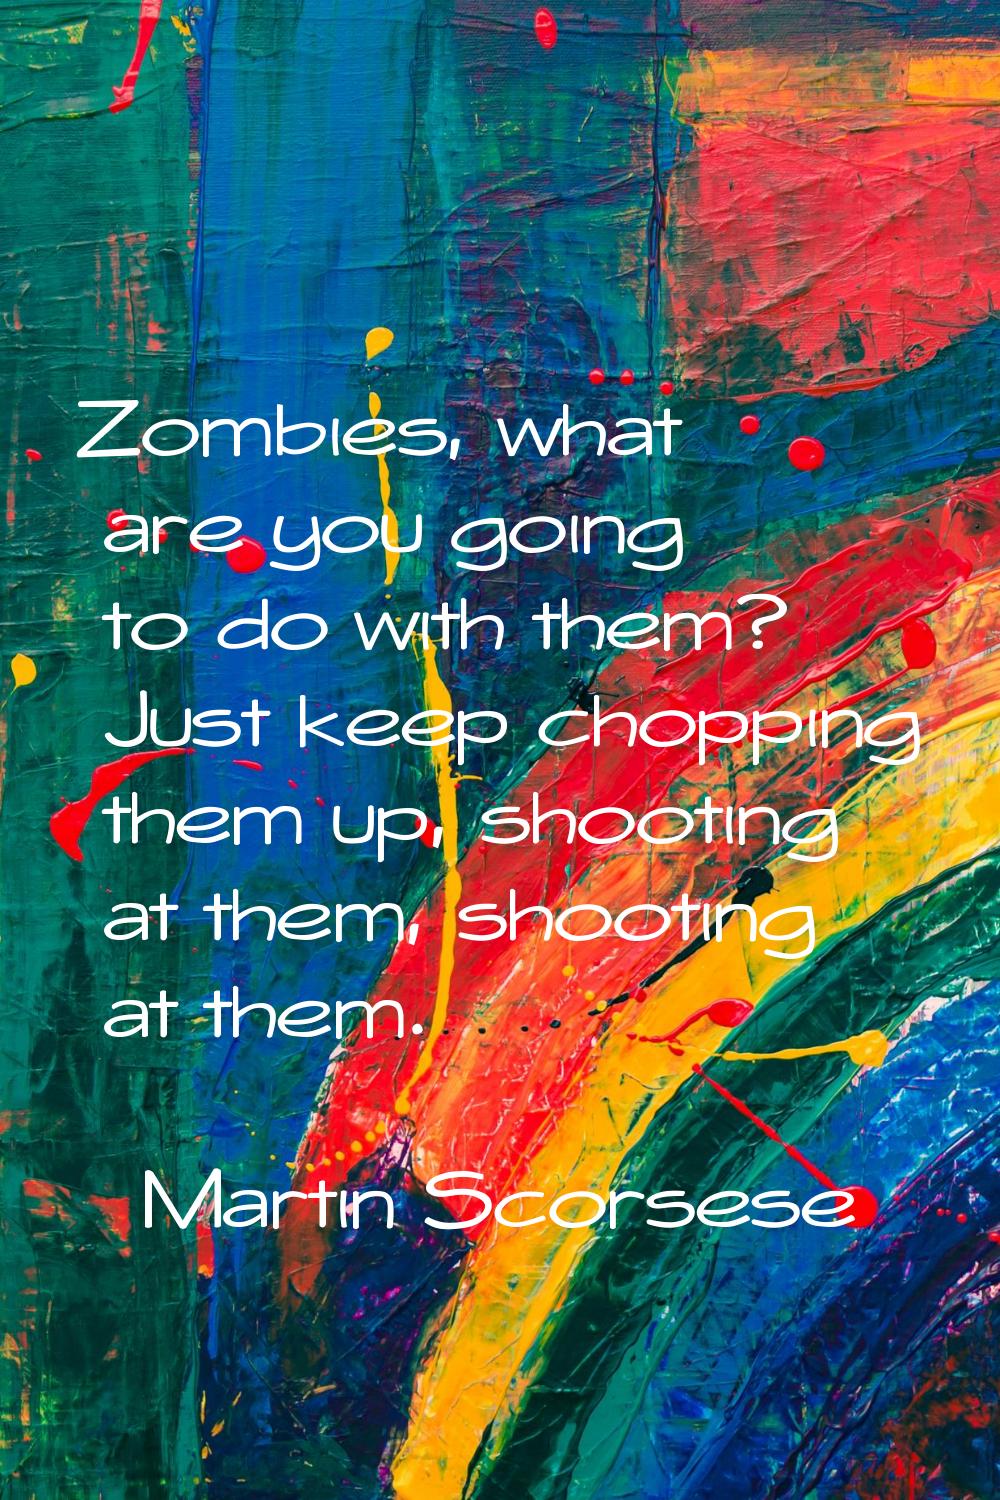 Zombies, what are you going to do with them? Just keep chopping them up, shooting at them, shooting